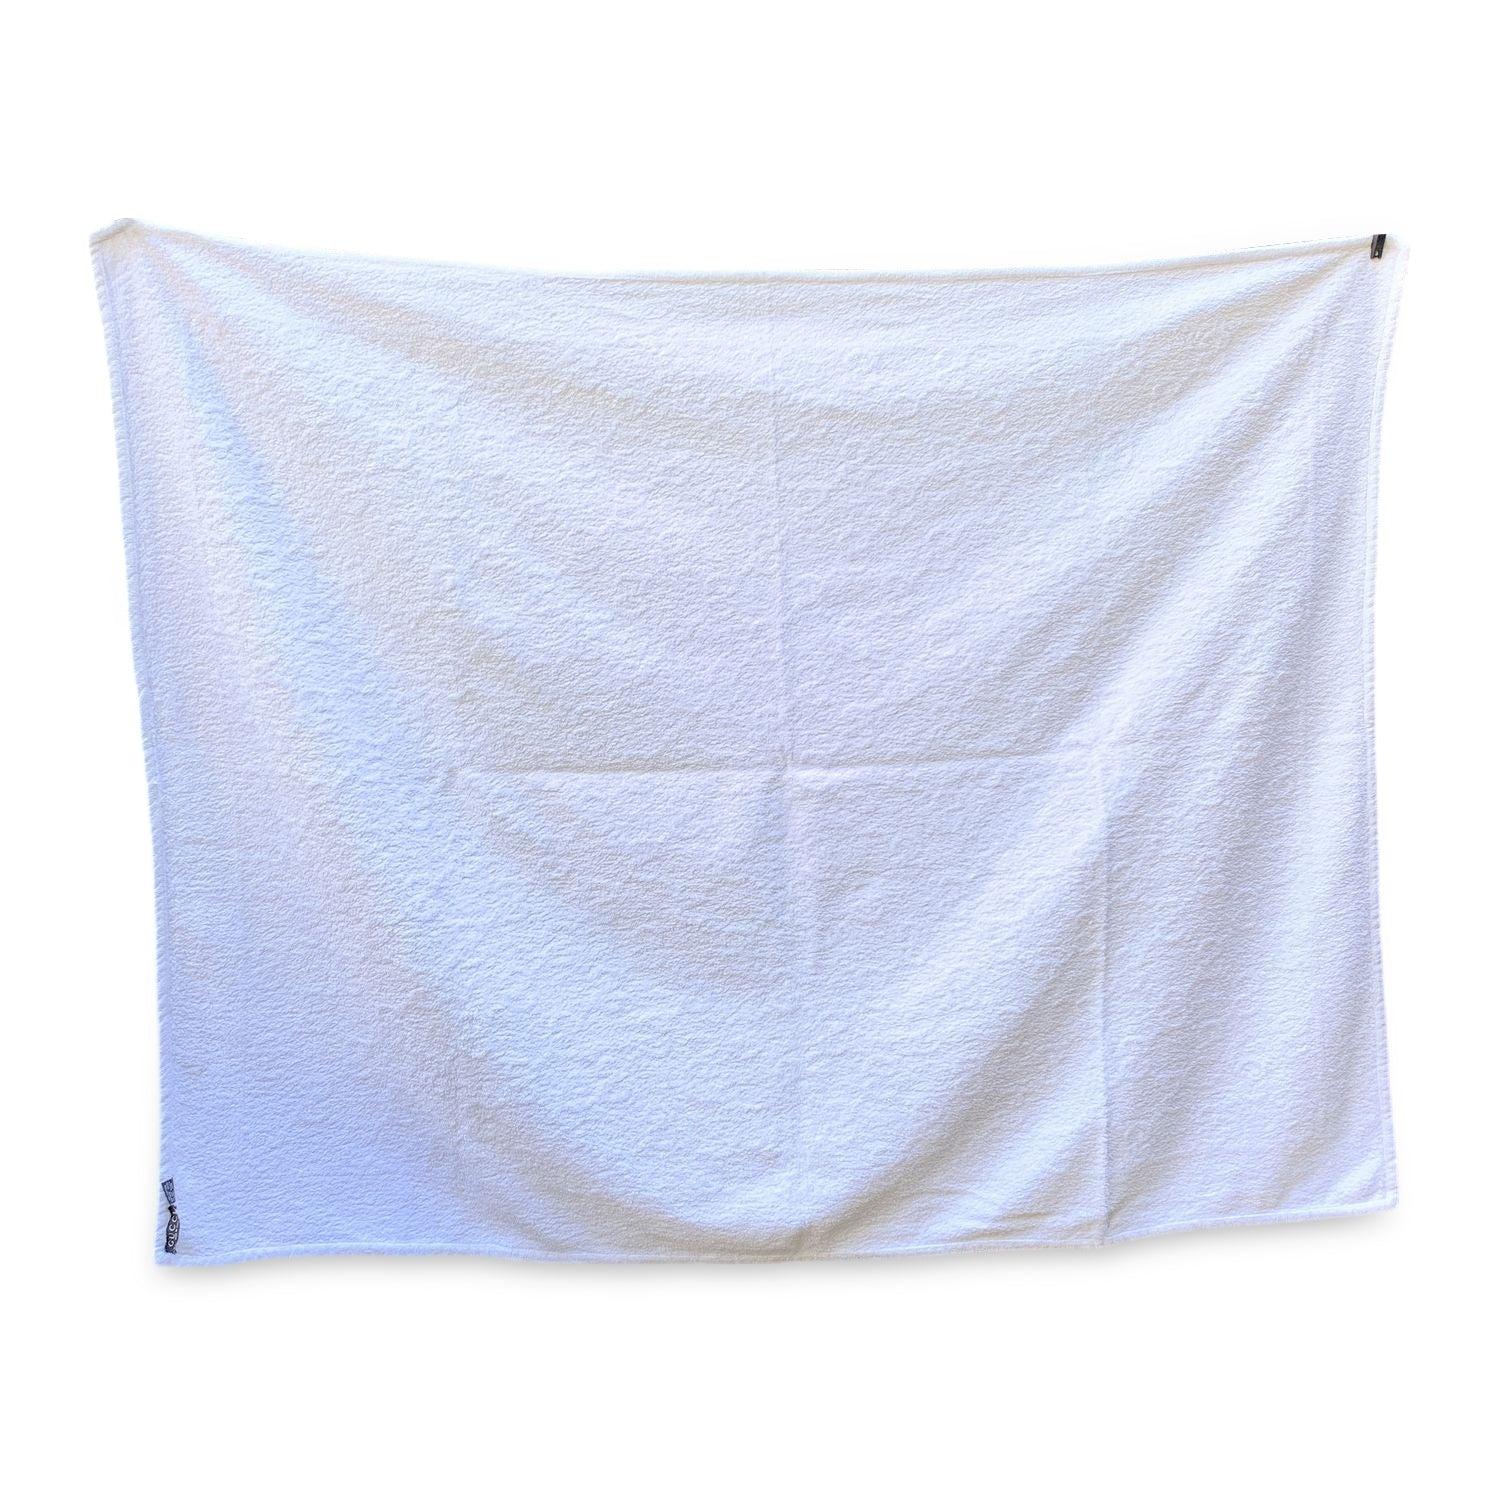 Elegant Vintage Gucci Terrycloth Cotton Large Beach Towel with Monogram pattern. White color. 100% cotton. Measurements: 54 x 41.5 inches - 137.2 x 105.5 cm. Details MATERIAL: Cotton COLOR: White MODEL: - GENDER: Unisex Adults COUNTRY OF